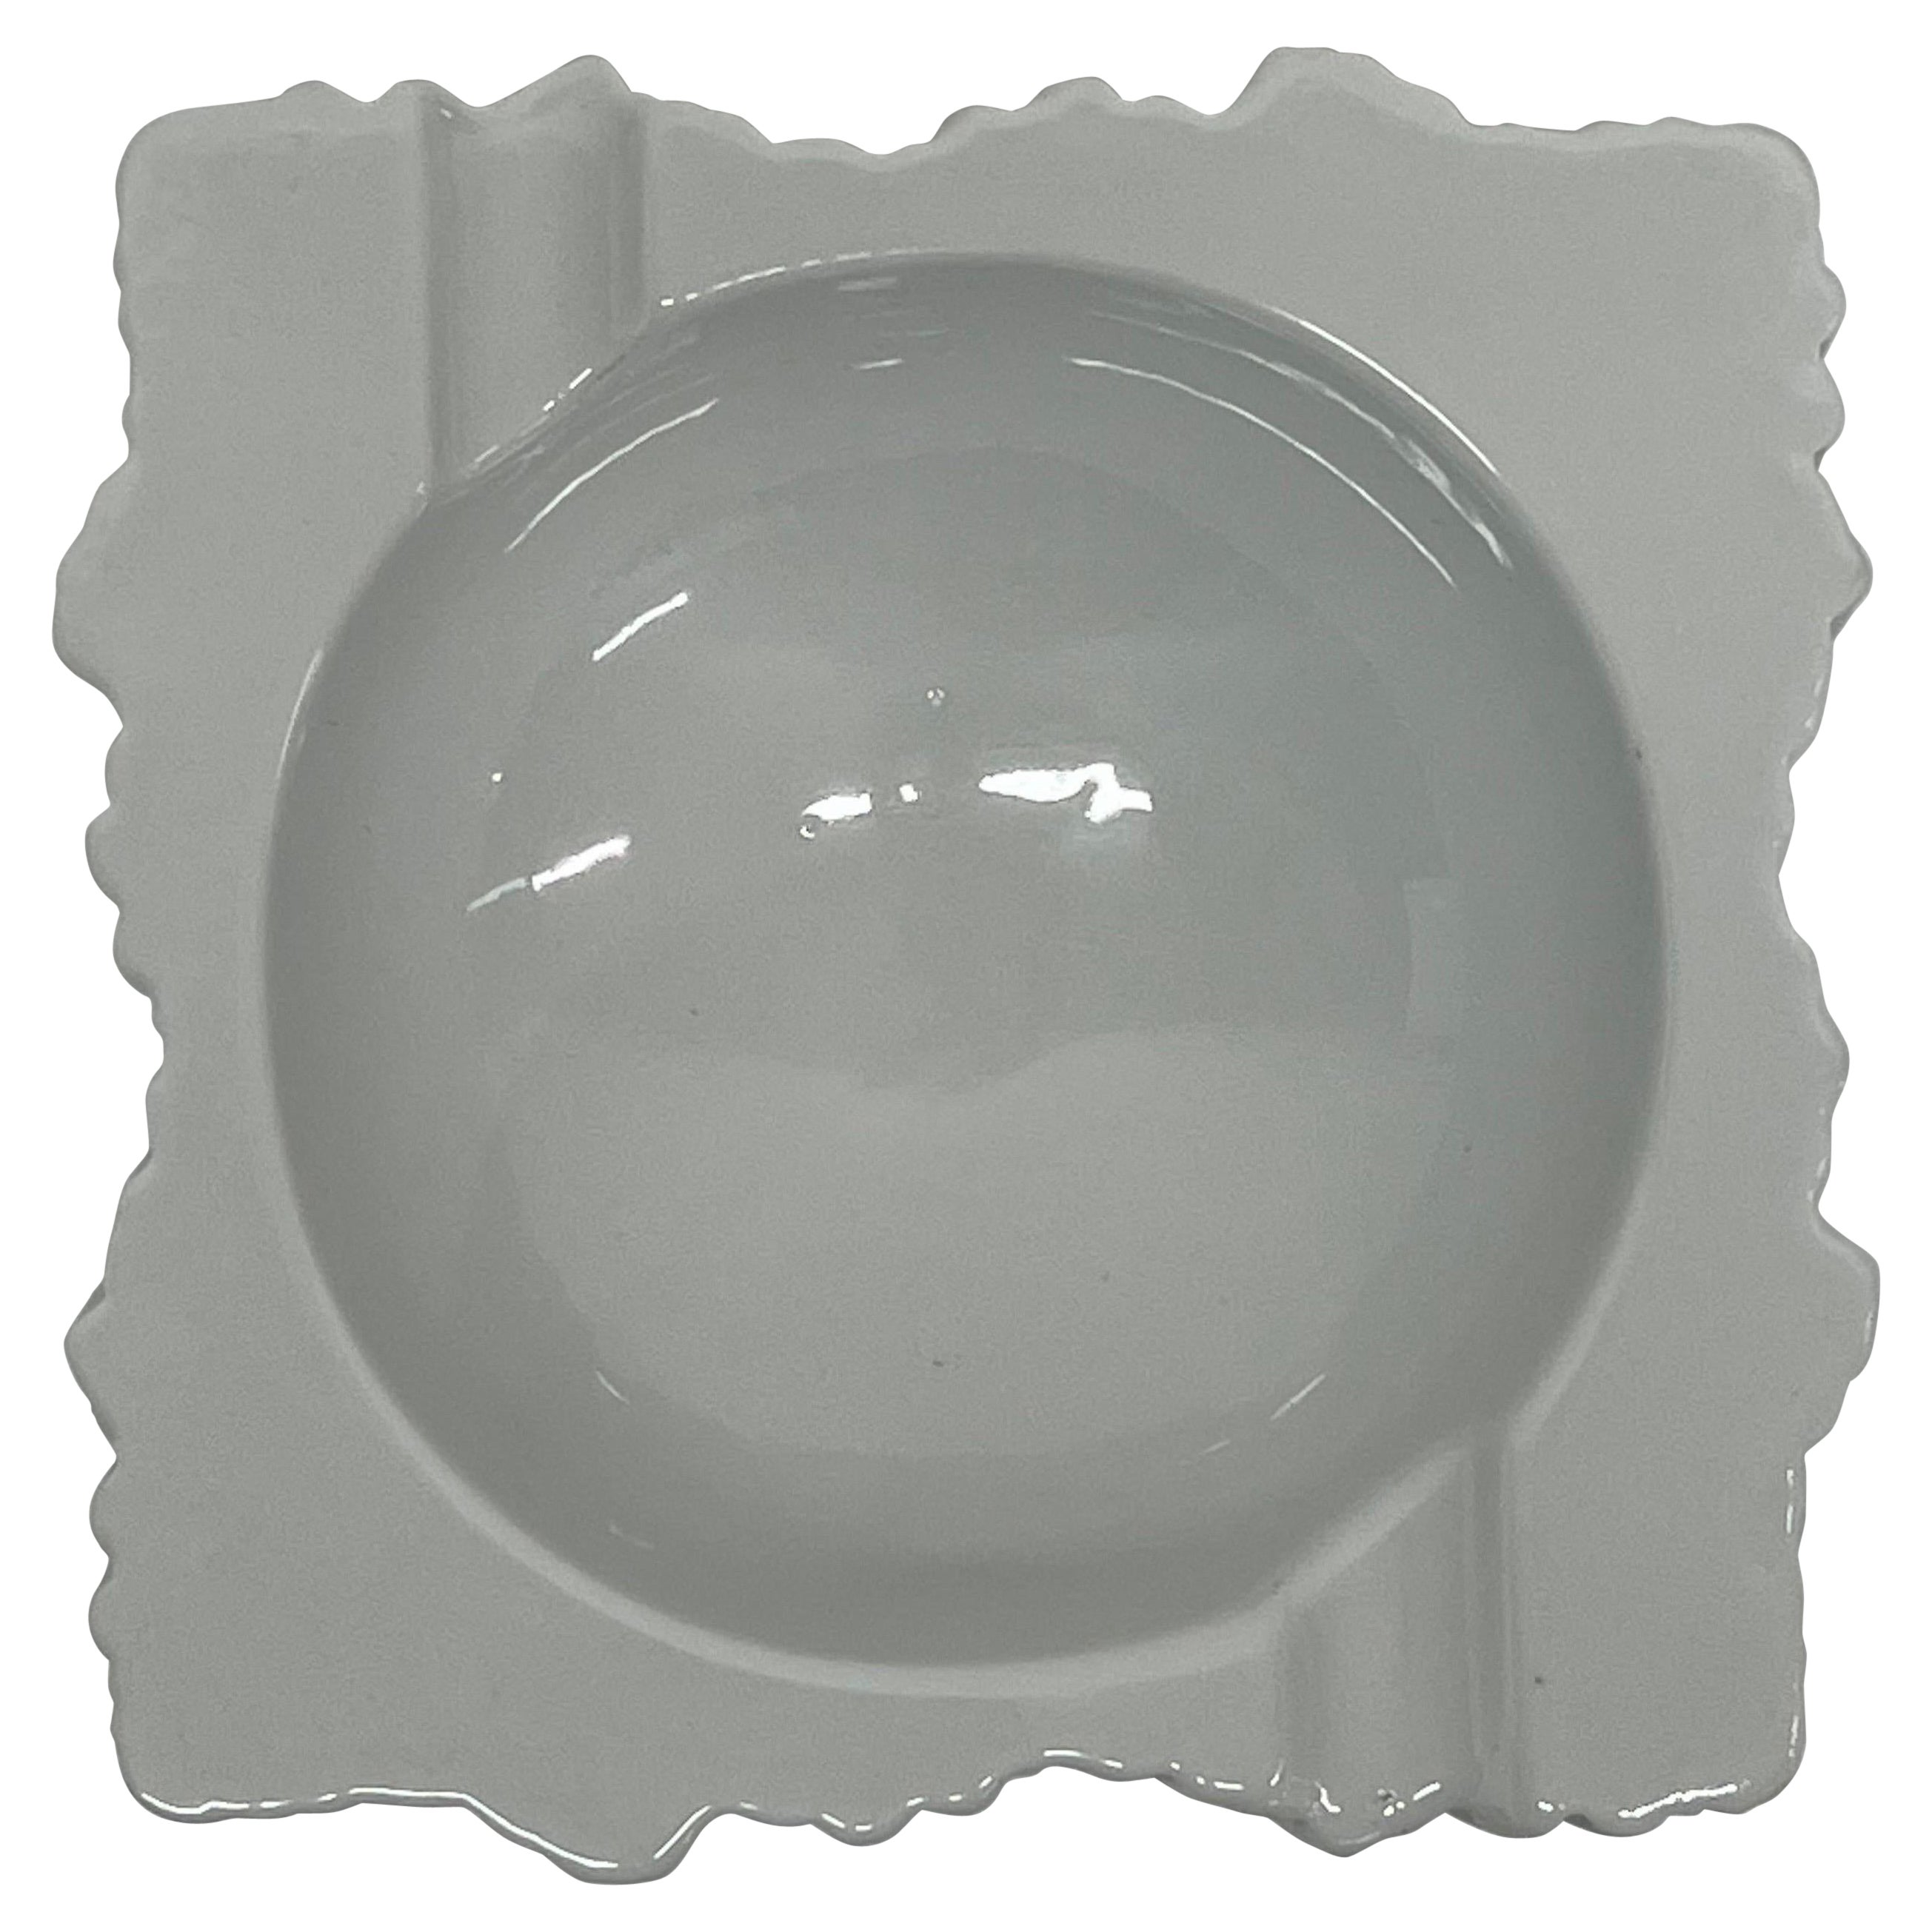 Modern White Porcelain Ashtray or Catchall by Naaman Israel, 1990s